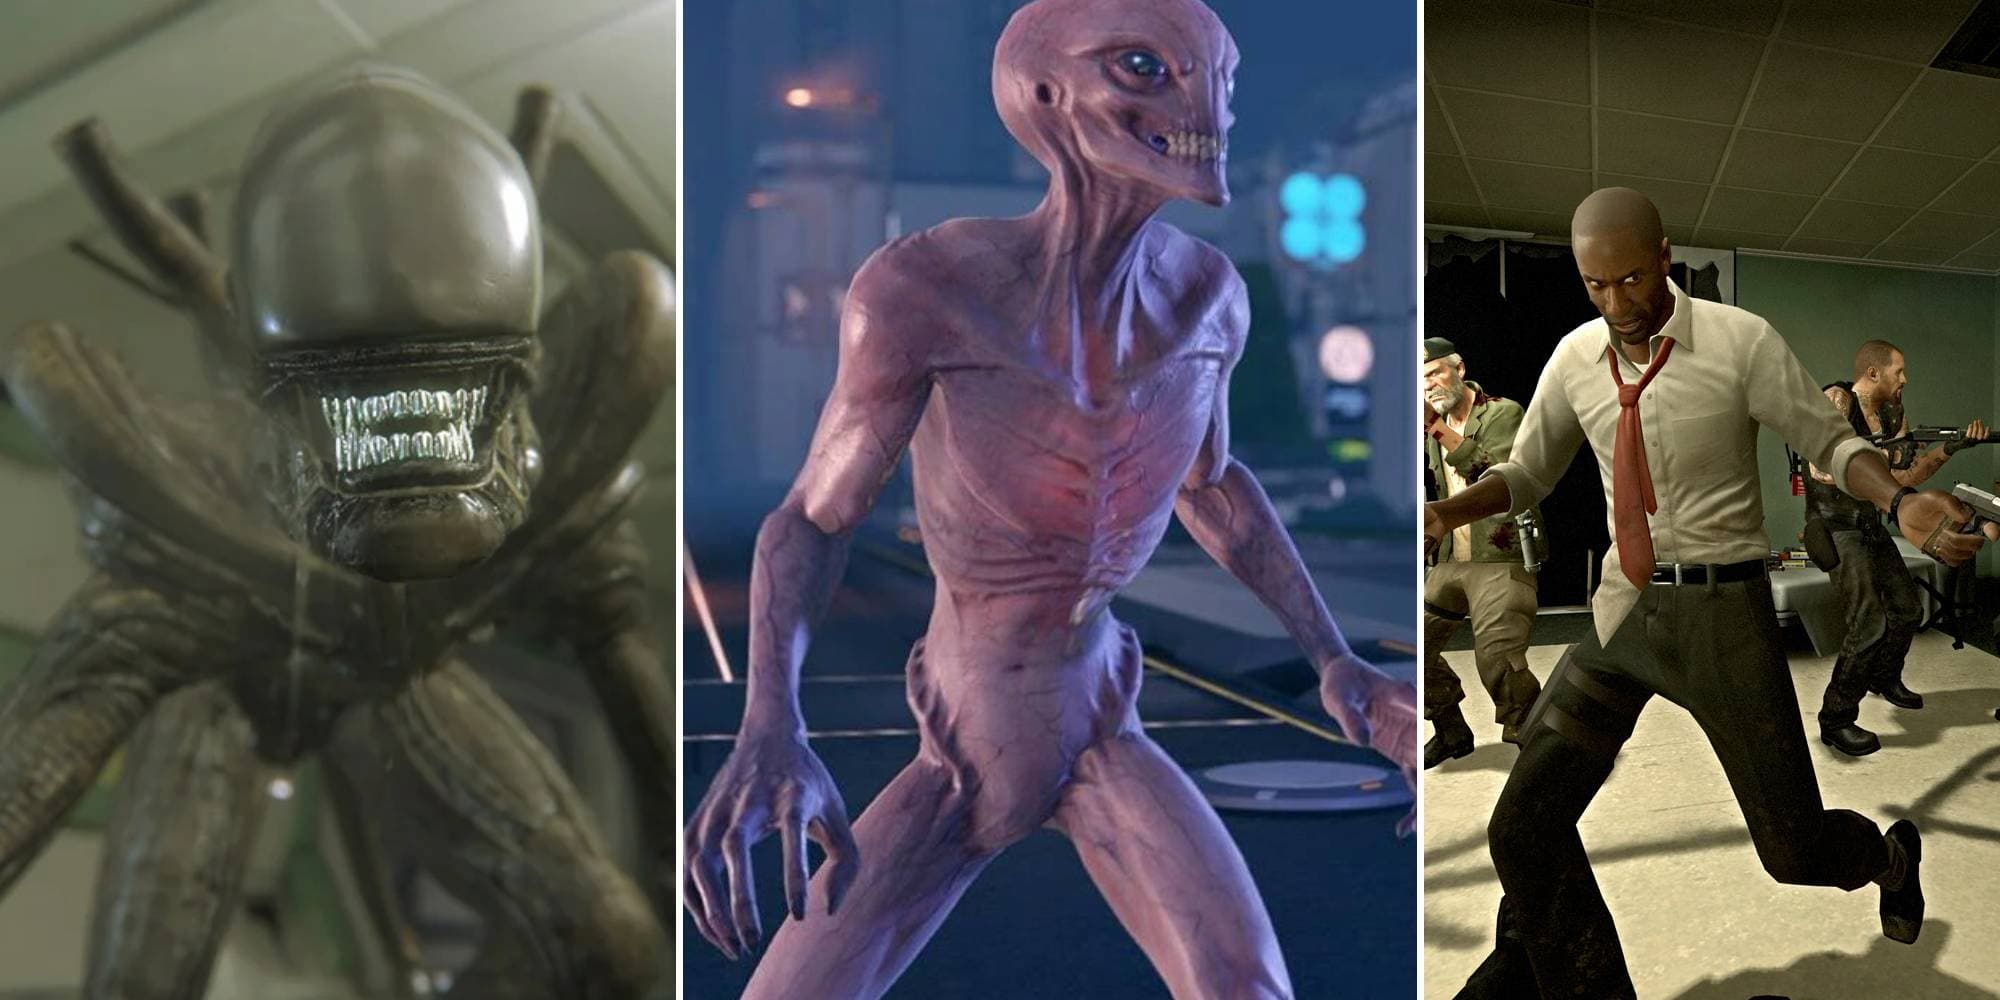 The Xenomorph in Alien Isolation, an alien in XCOM 2, and a group fighting zombies in Left 4 Dead.